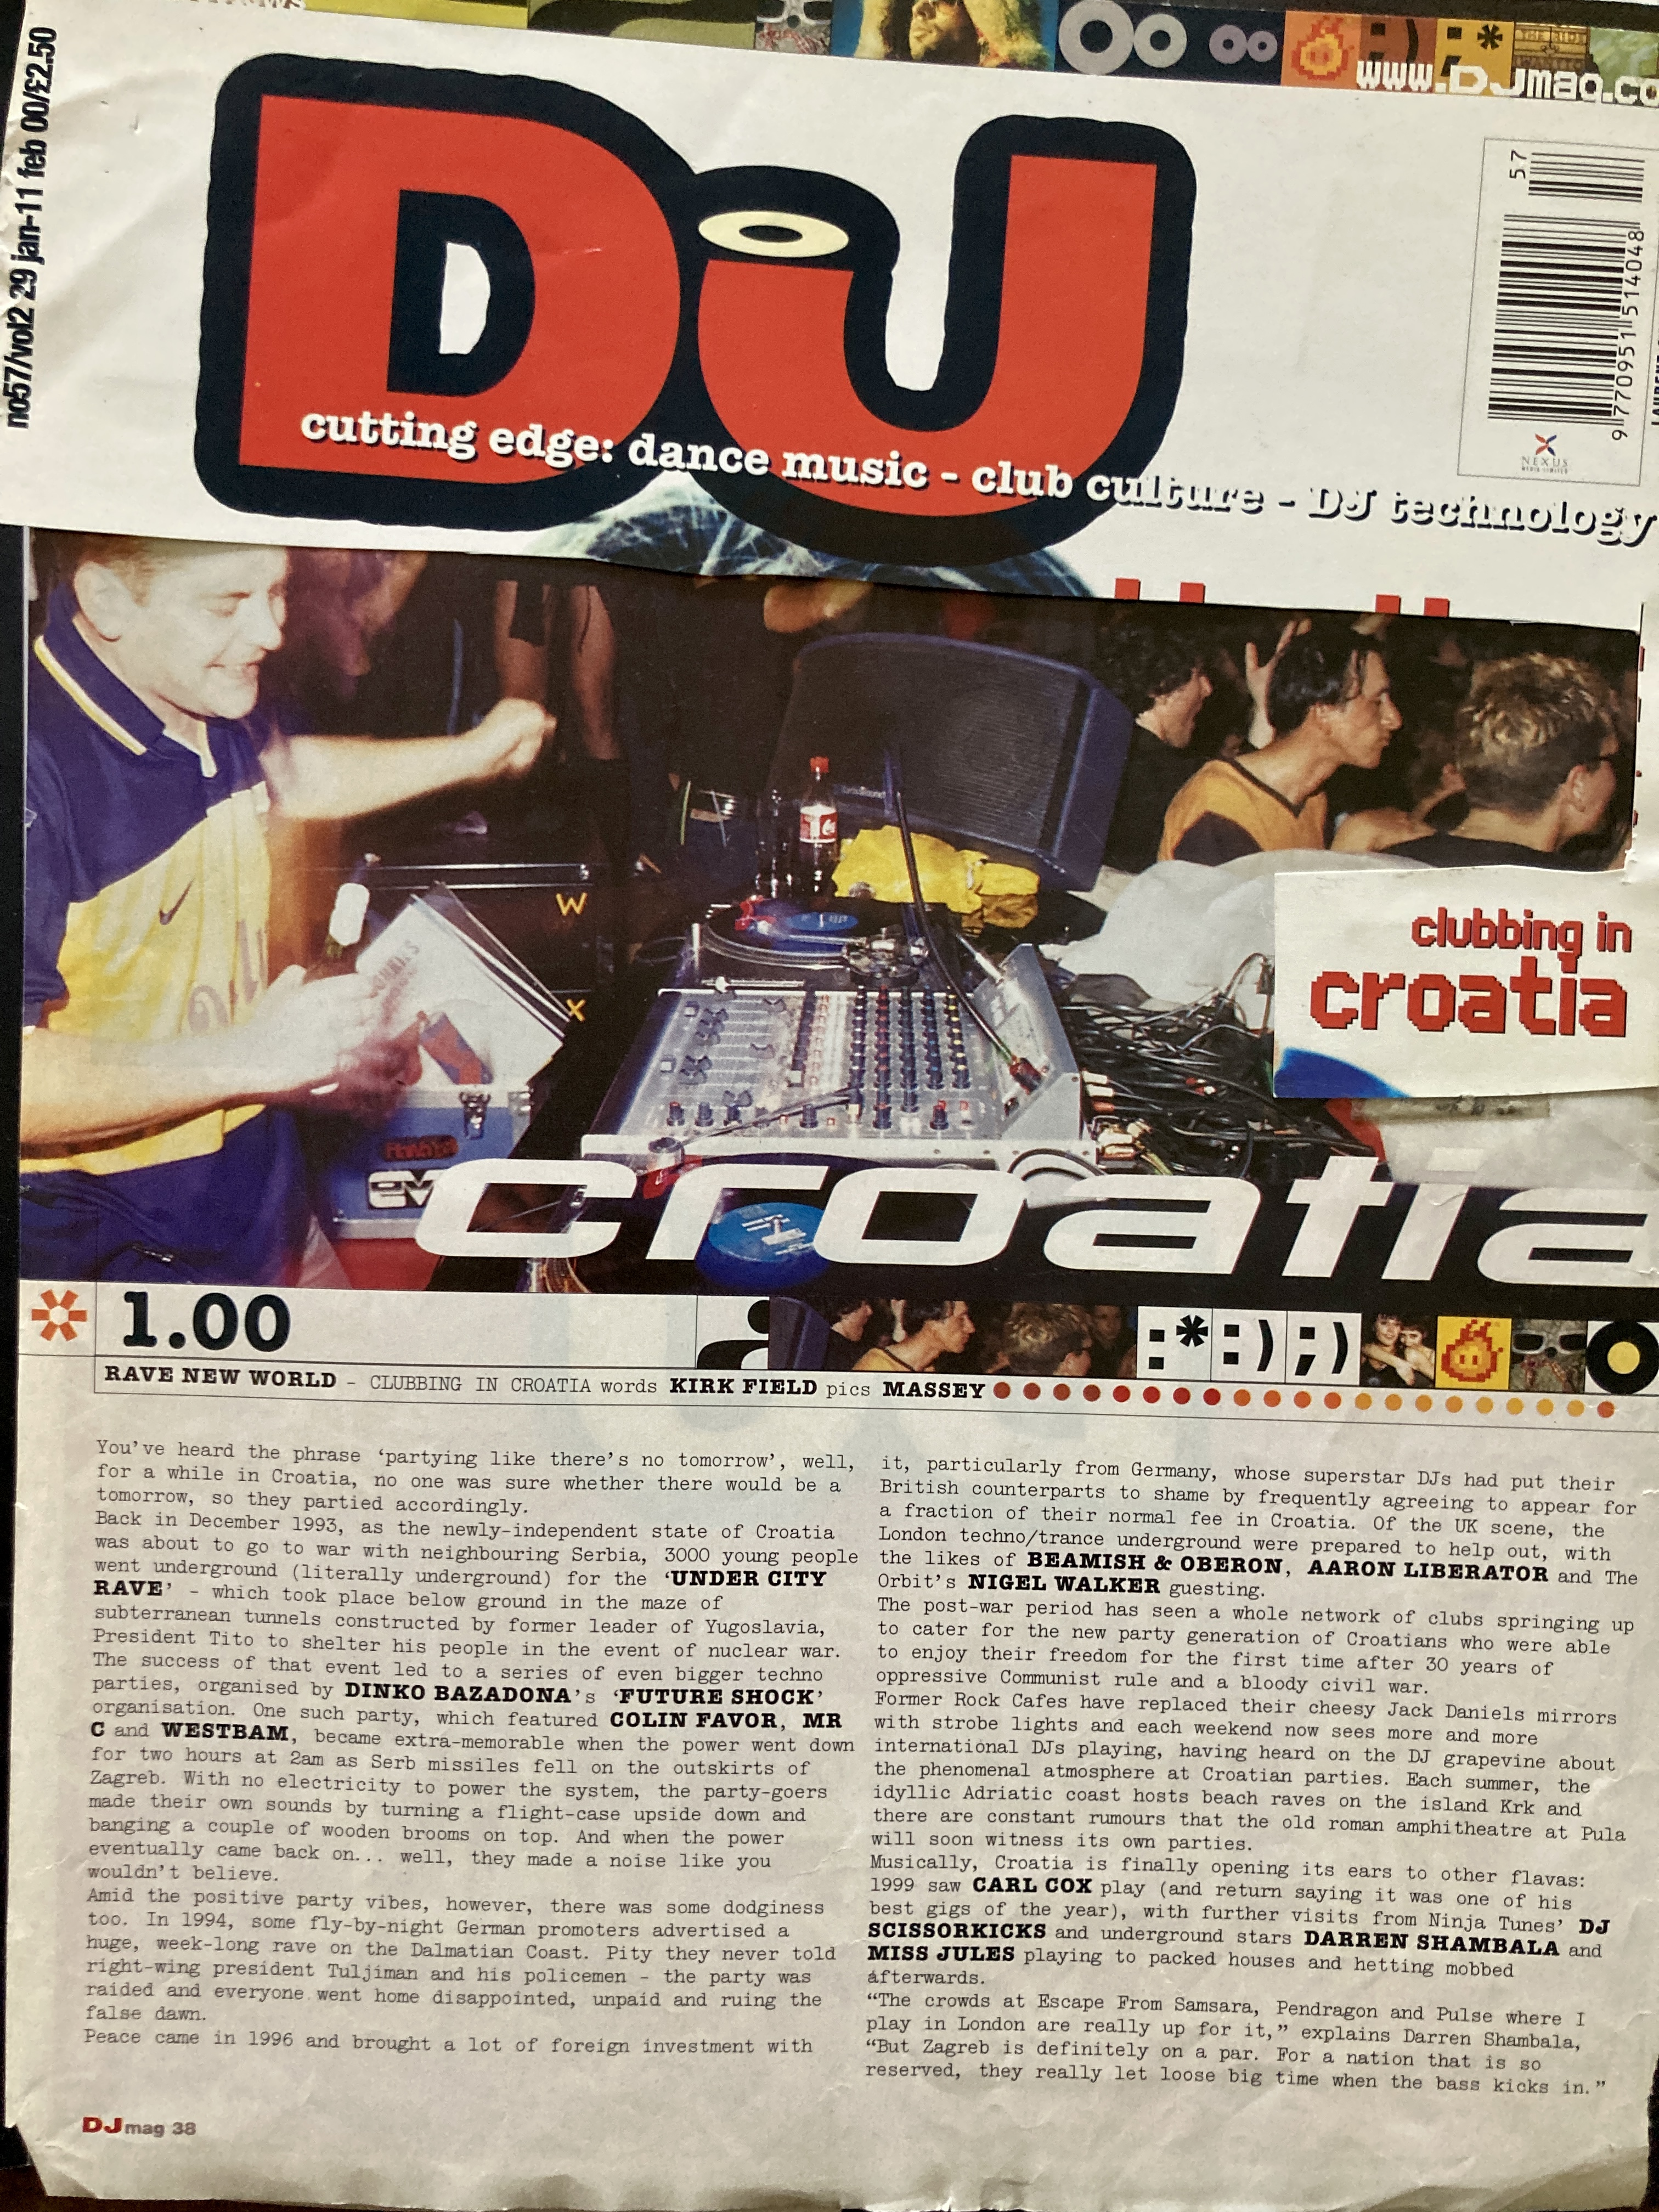 Cutting from Kirk Field's DJ Mag cover story on clubbing in Croatia